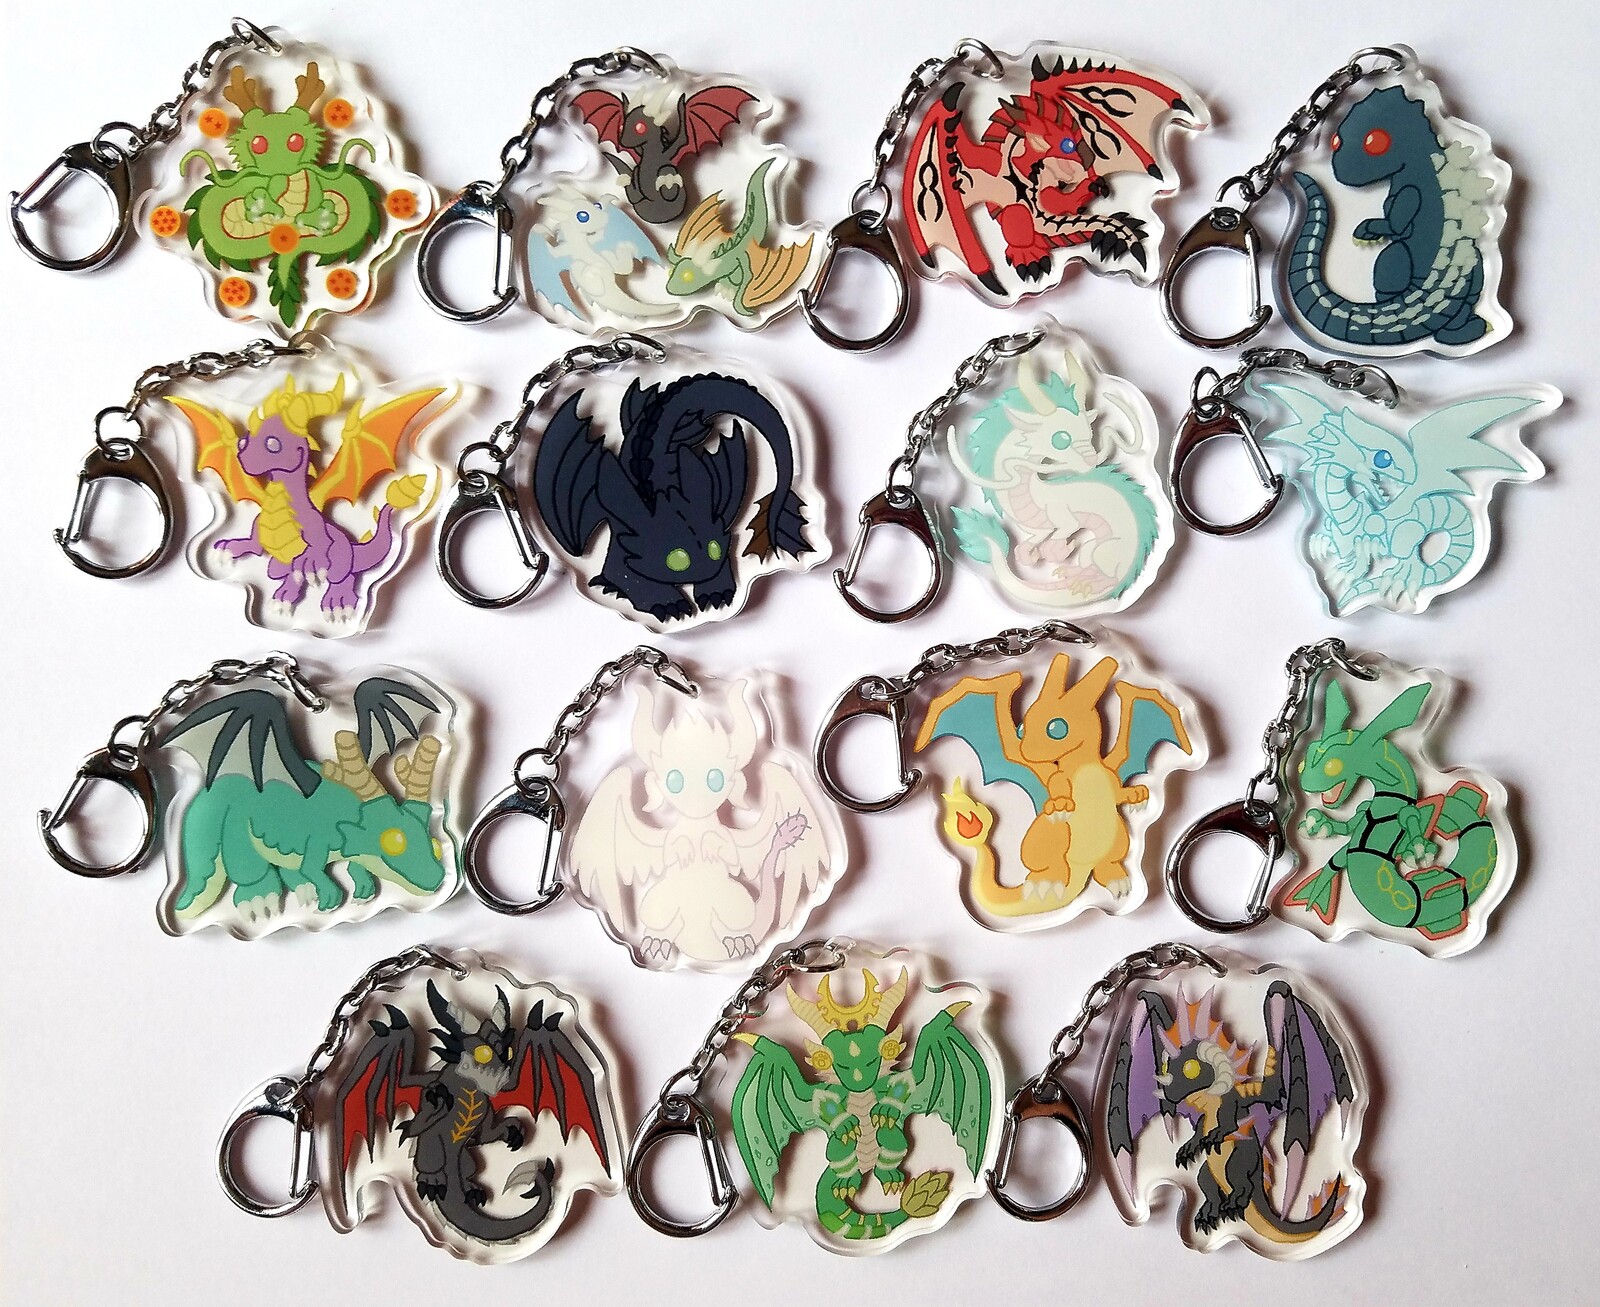 Acrylic charms of a variety of dragons from different series. Shenron, Game of Thrones, Rathalos, Godzilla, Spyro, Toothless, Haku, Blue Eyes White Dragon, Tohru, Kanna, Charizard, Rayquaza, Deathwing, Ysera, and Onyxia. 128 total designs available. 